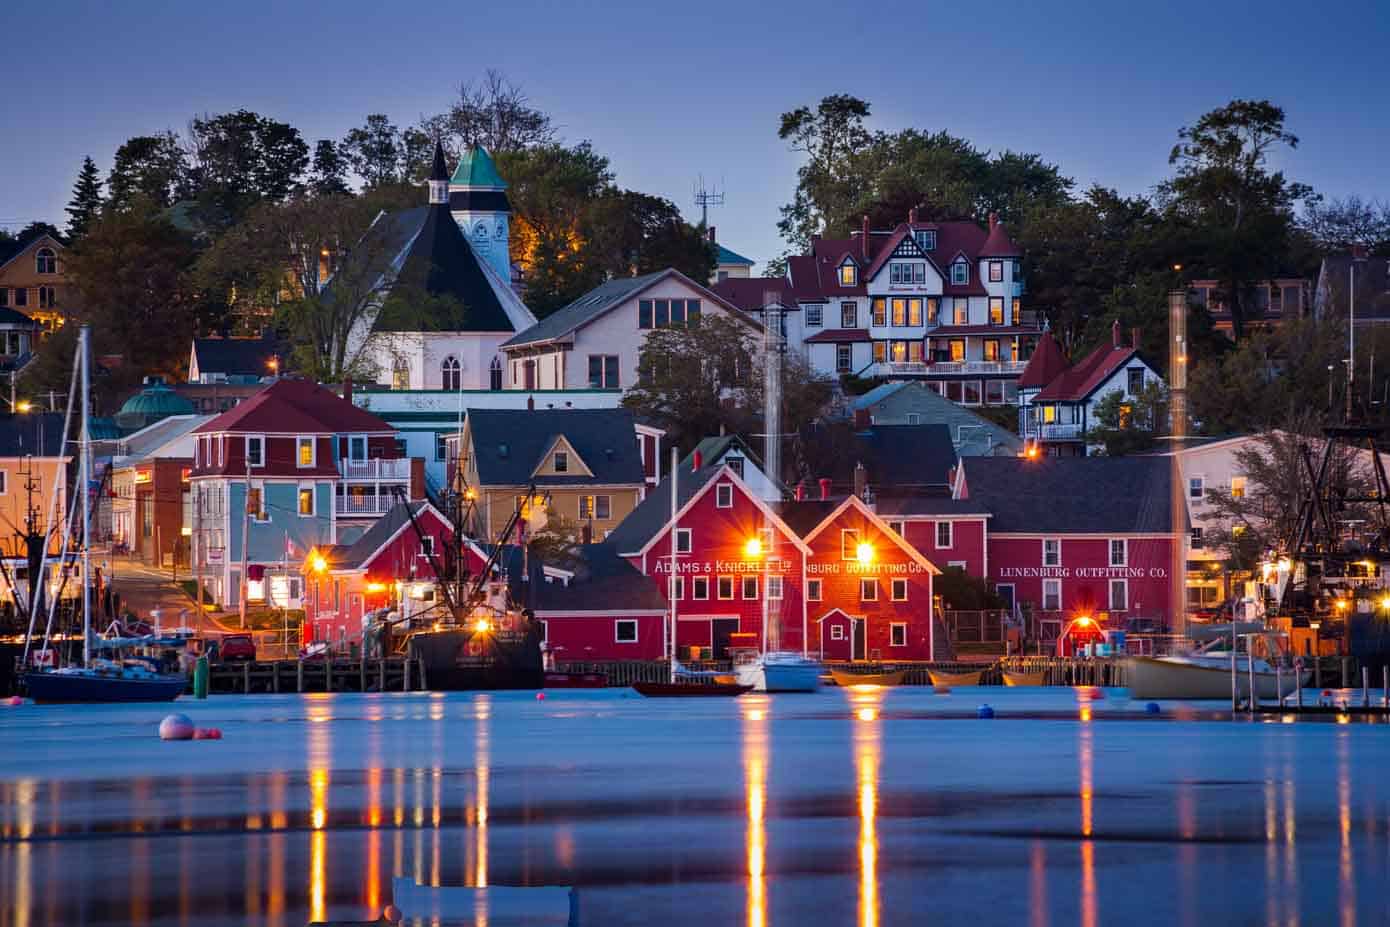 Historic buildings sit on a waterfront with many boats in Lunenburg, Nova Scotia.